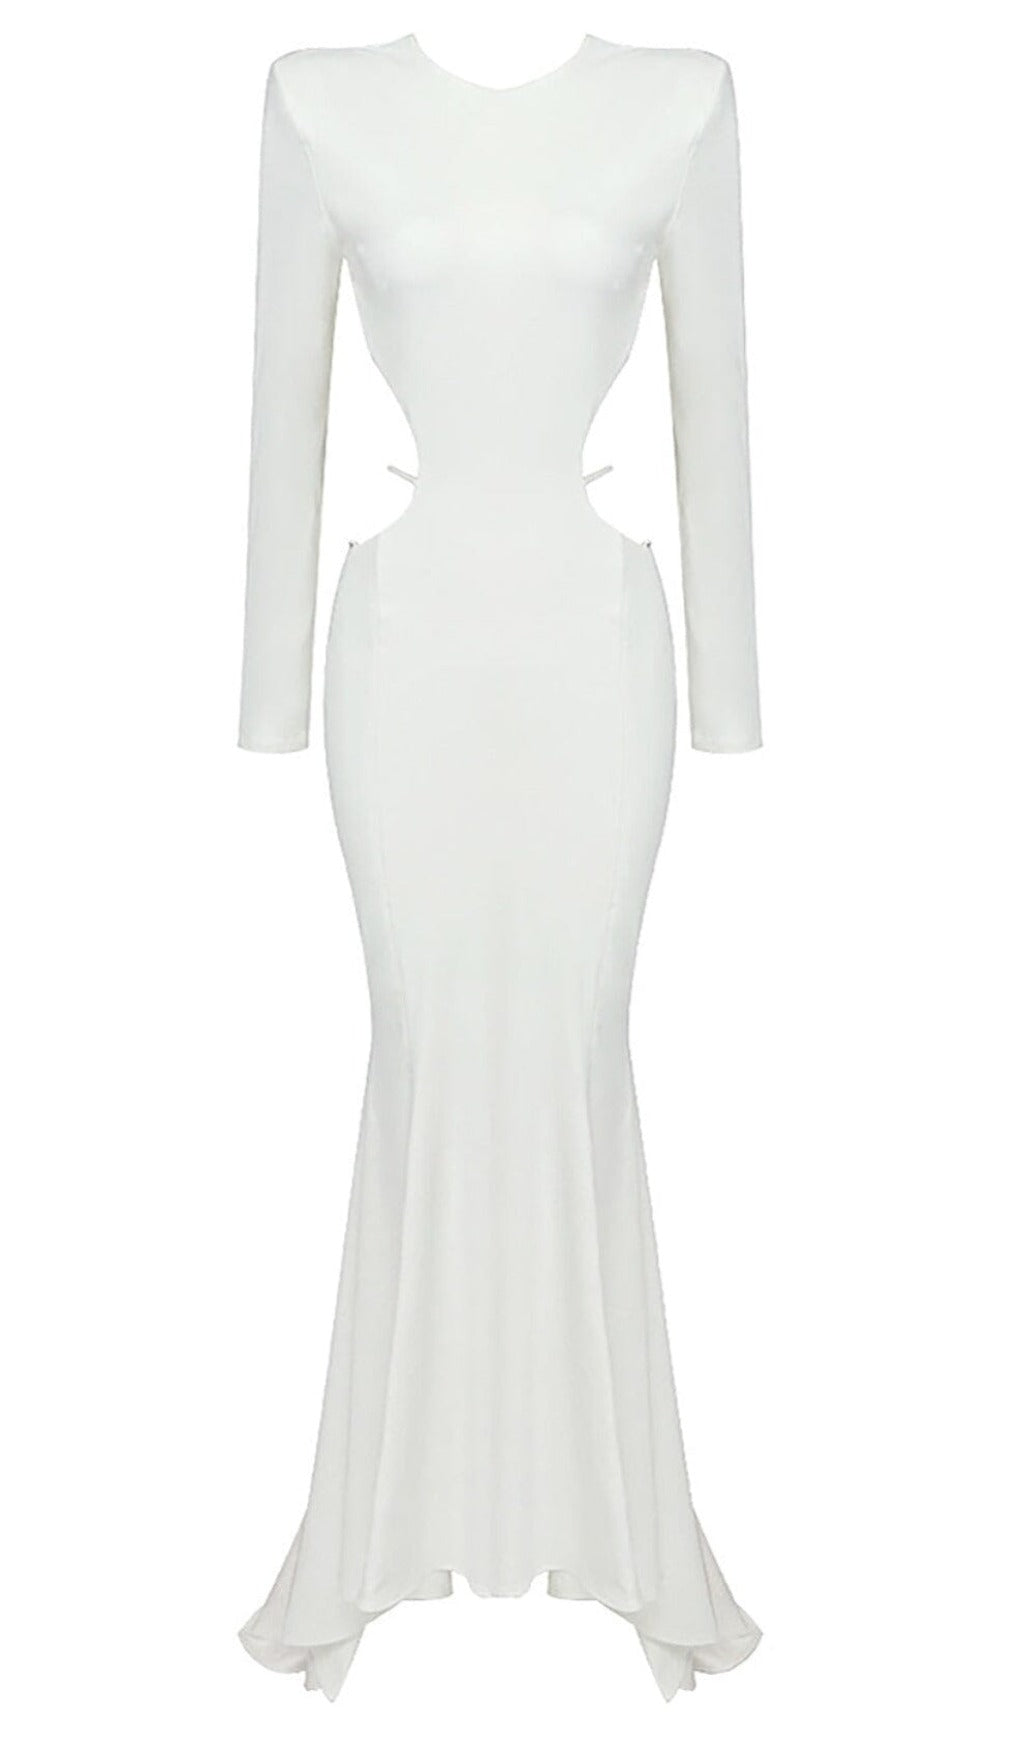 LONG SLEEVE CUT OUT BACKLESS MERMAID MAXI DRESS IN WHITE